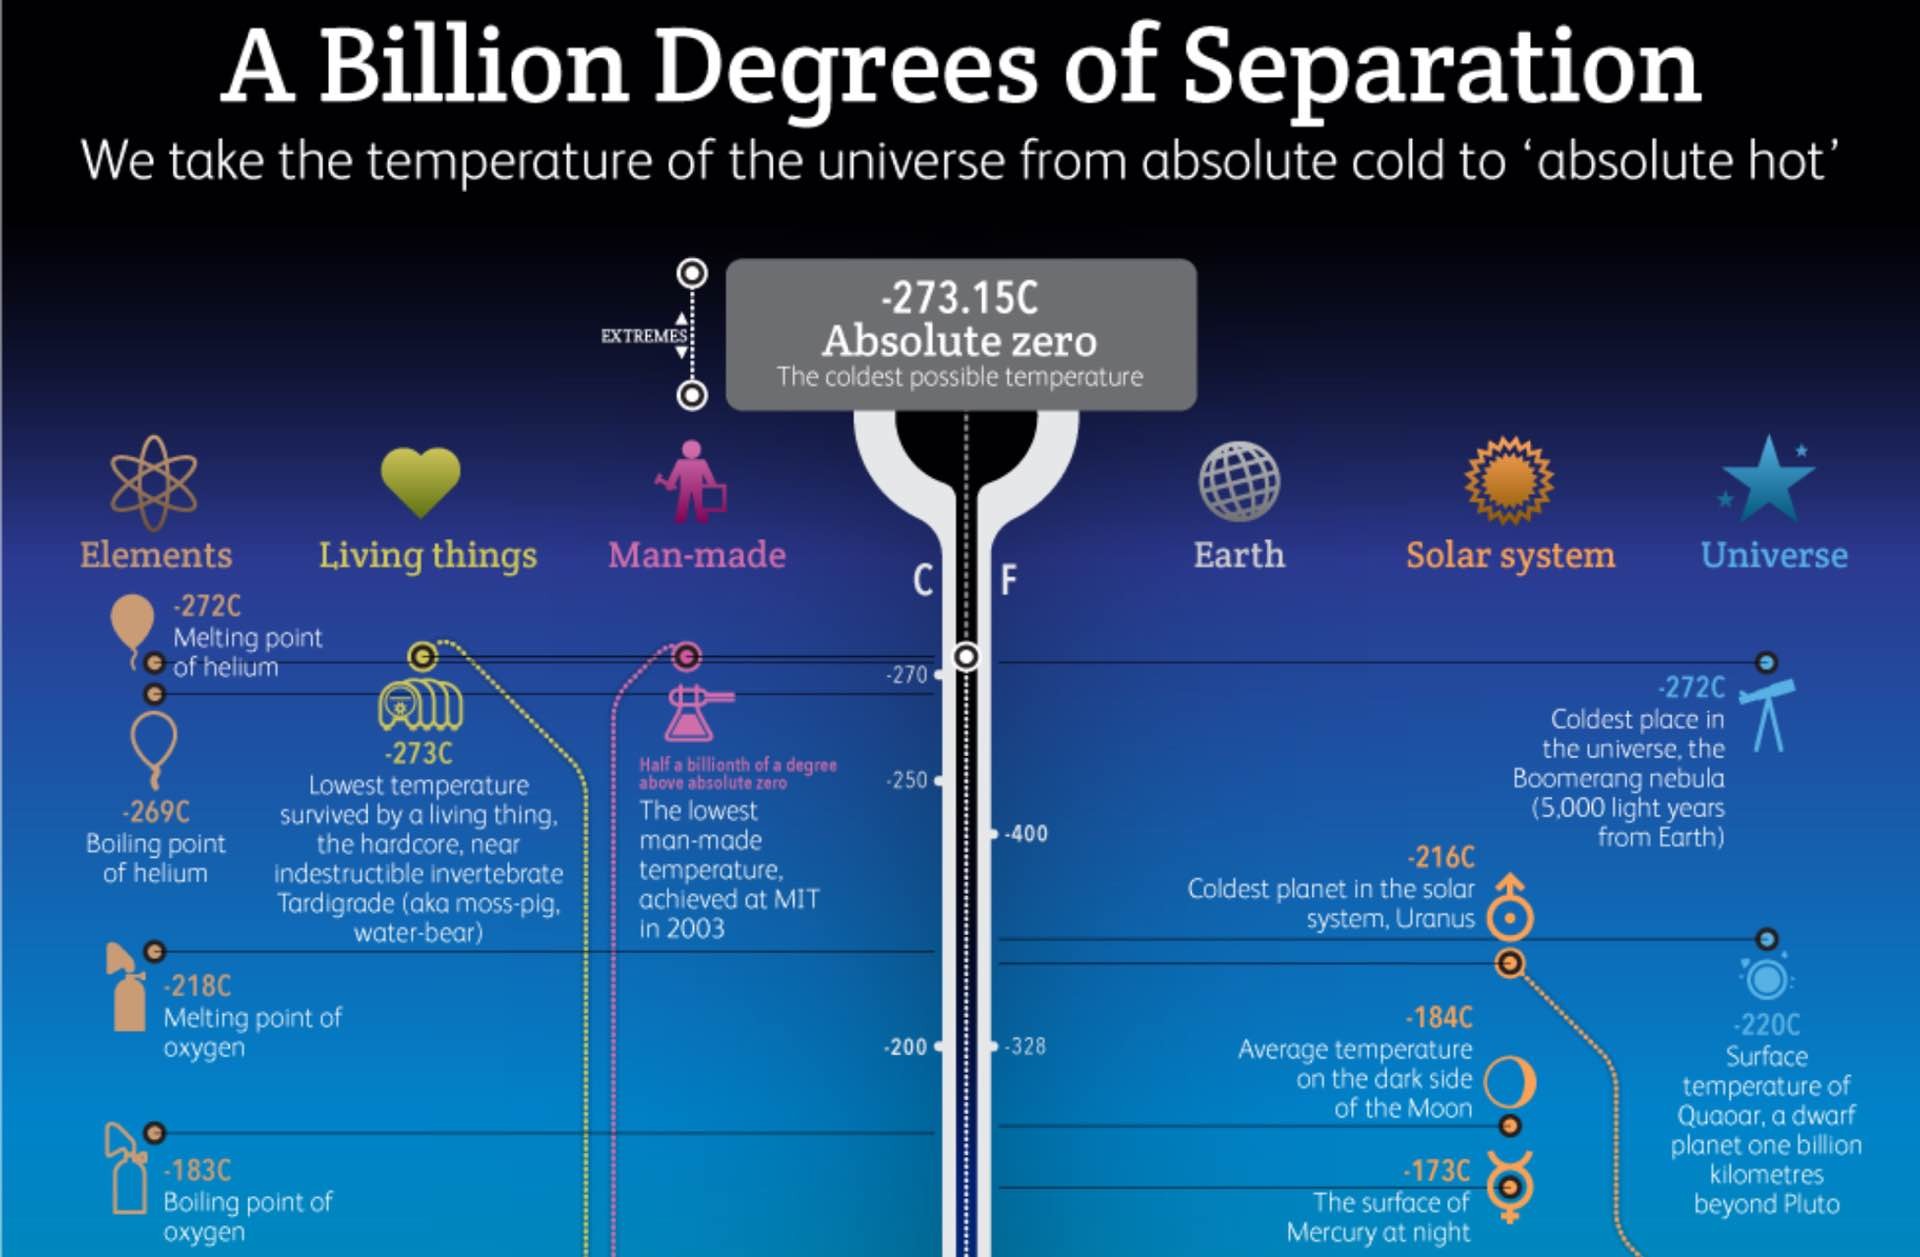 Excerpt of [this infographic](http://www.bbc.com/future/story/20131218-absolute-zero-to-absolute-hot) by BBC Future